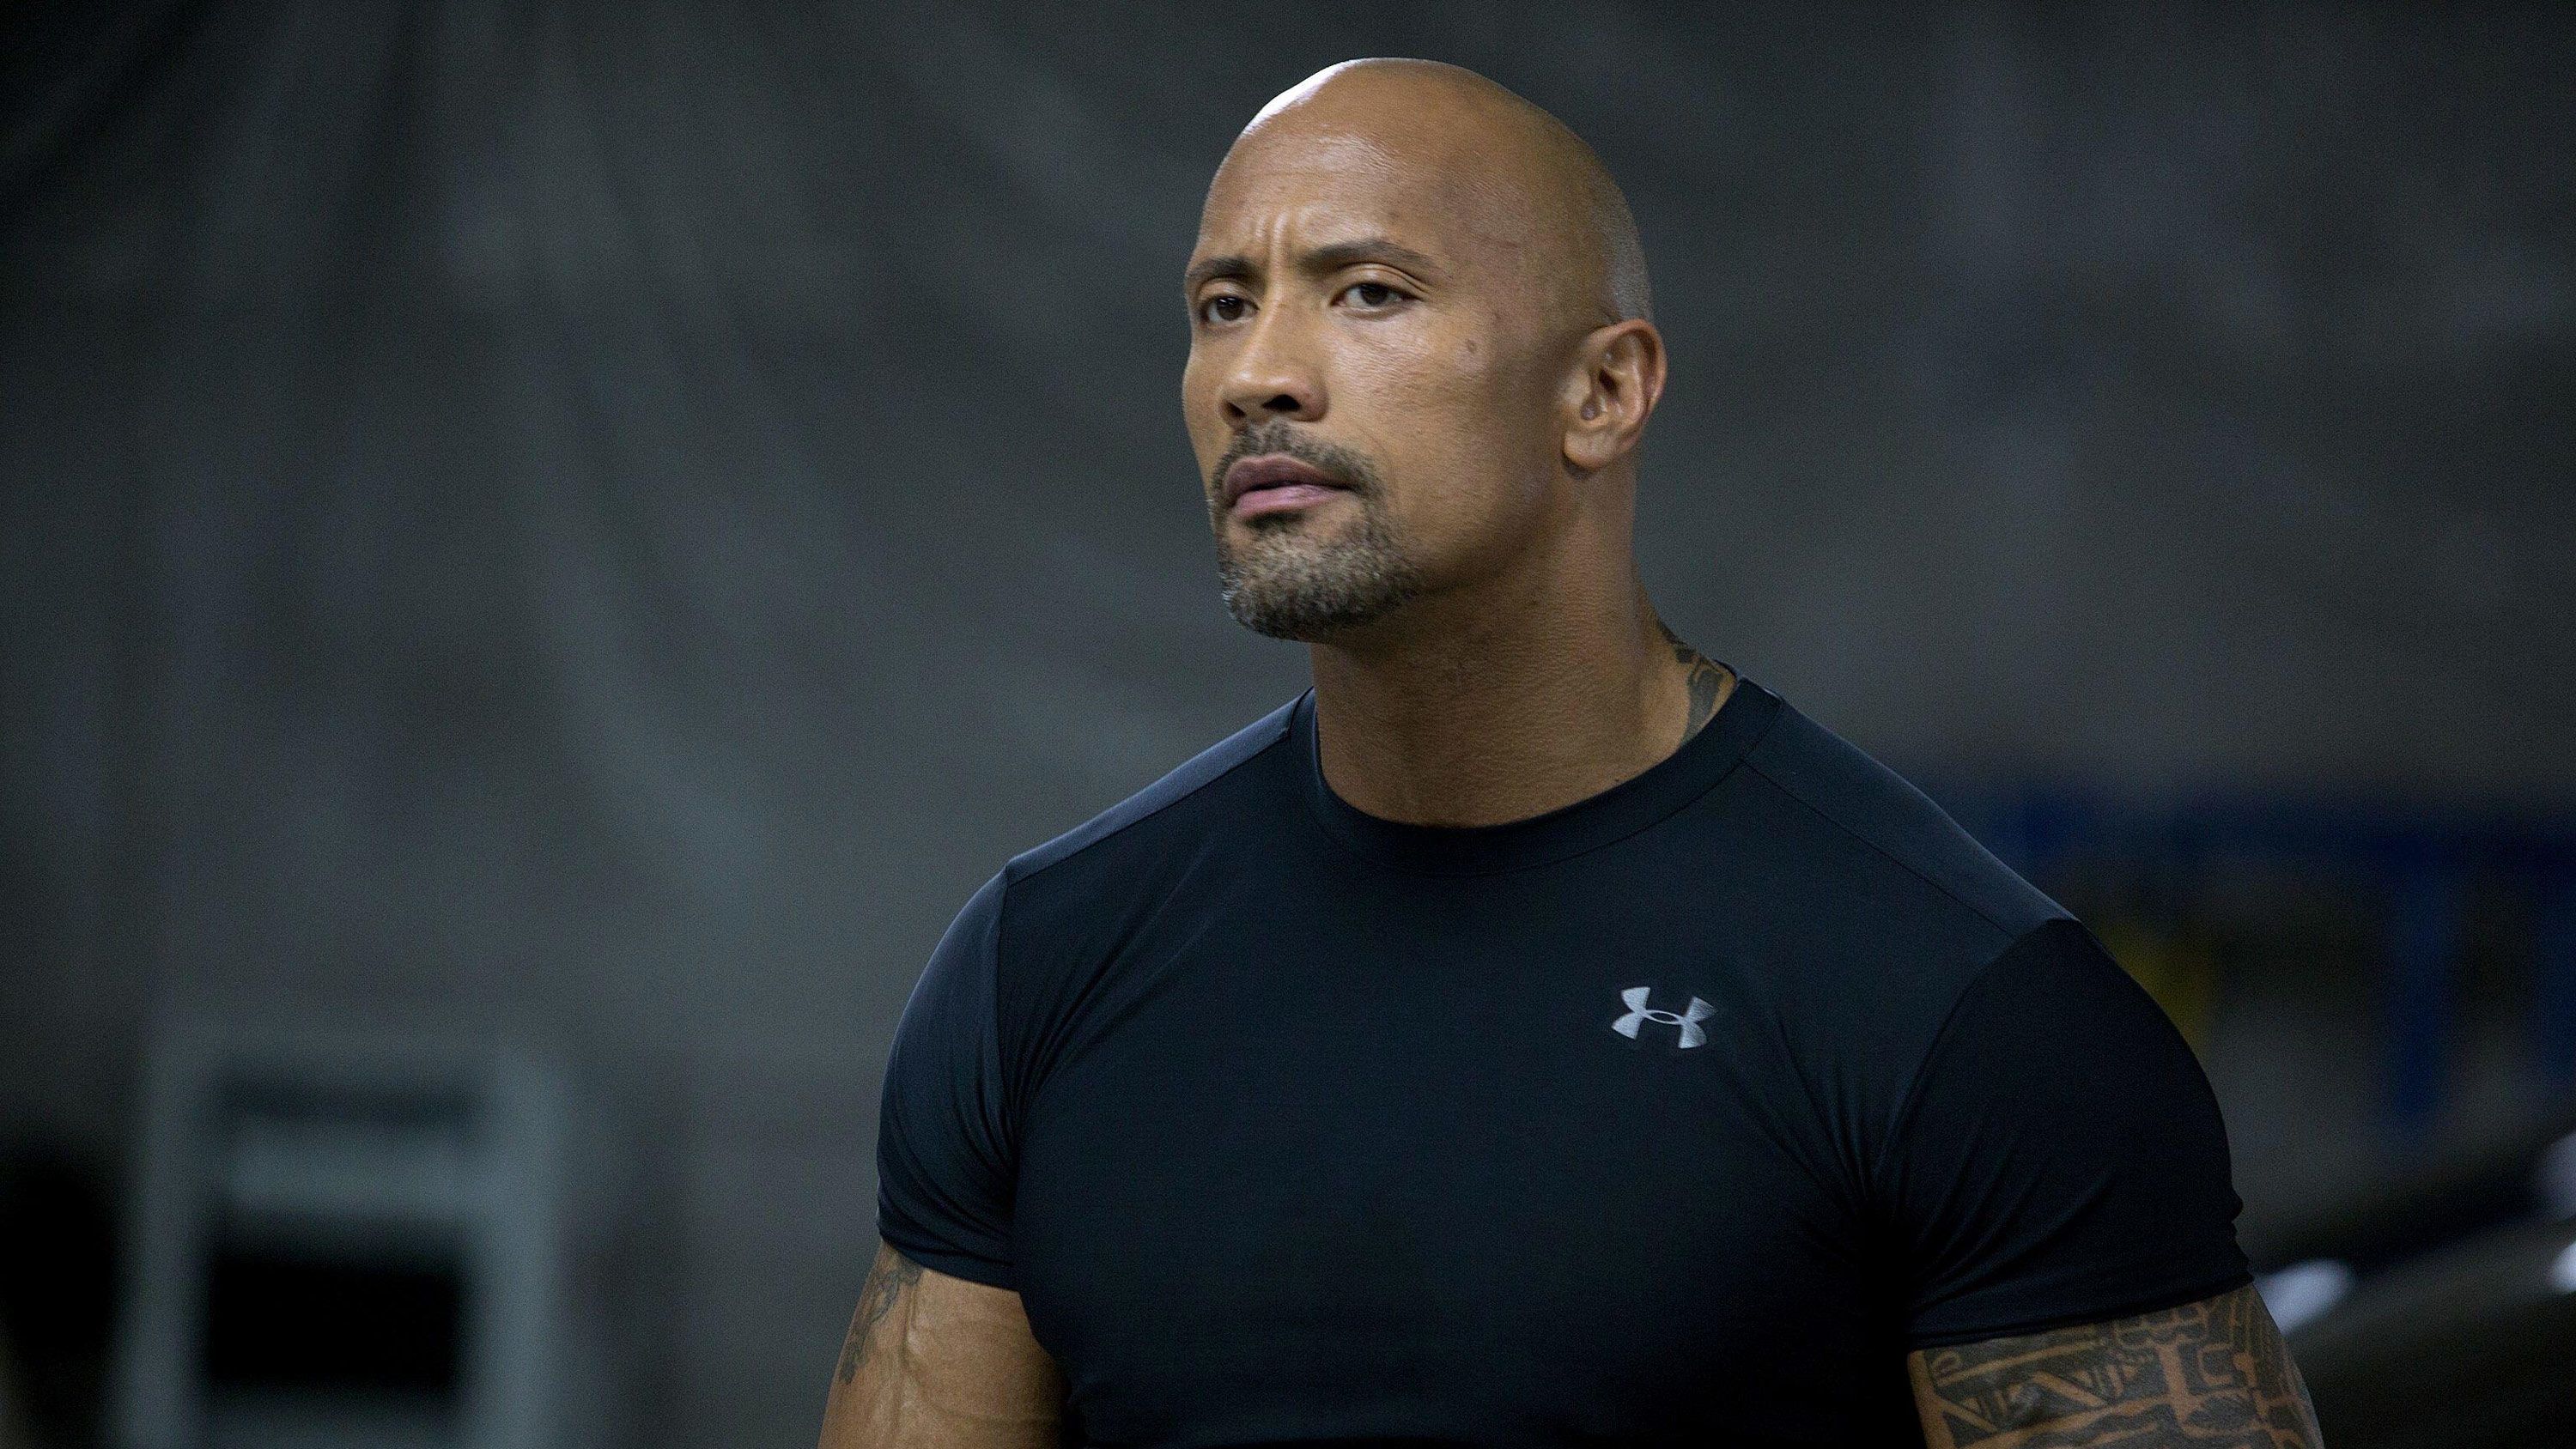 Dwayne Johnson says he's returning to 'Fast & Furious' franchise as Hobbs